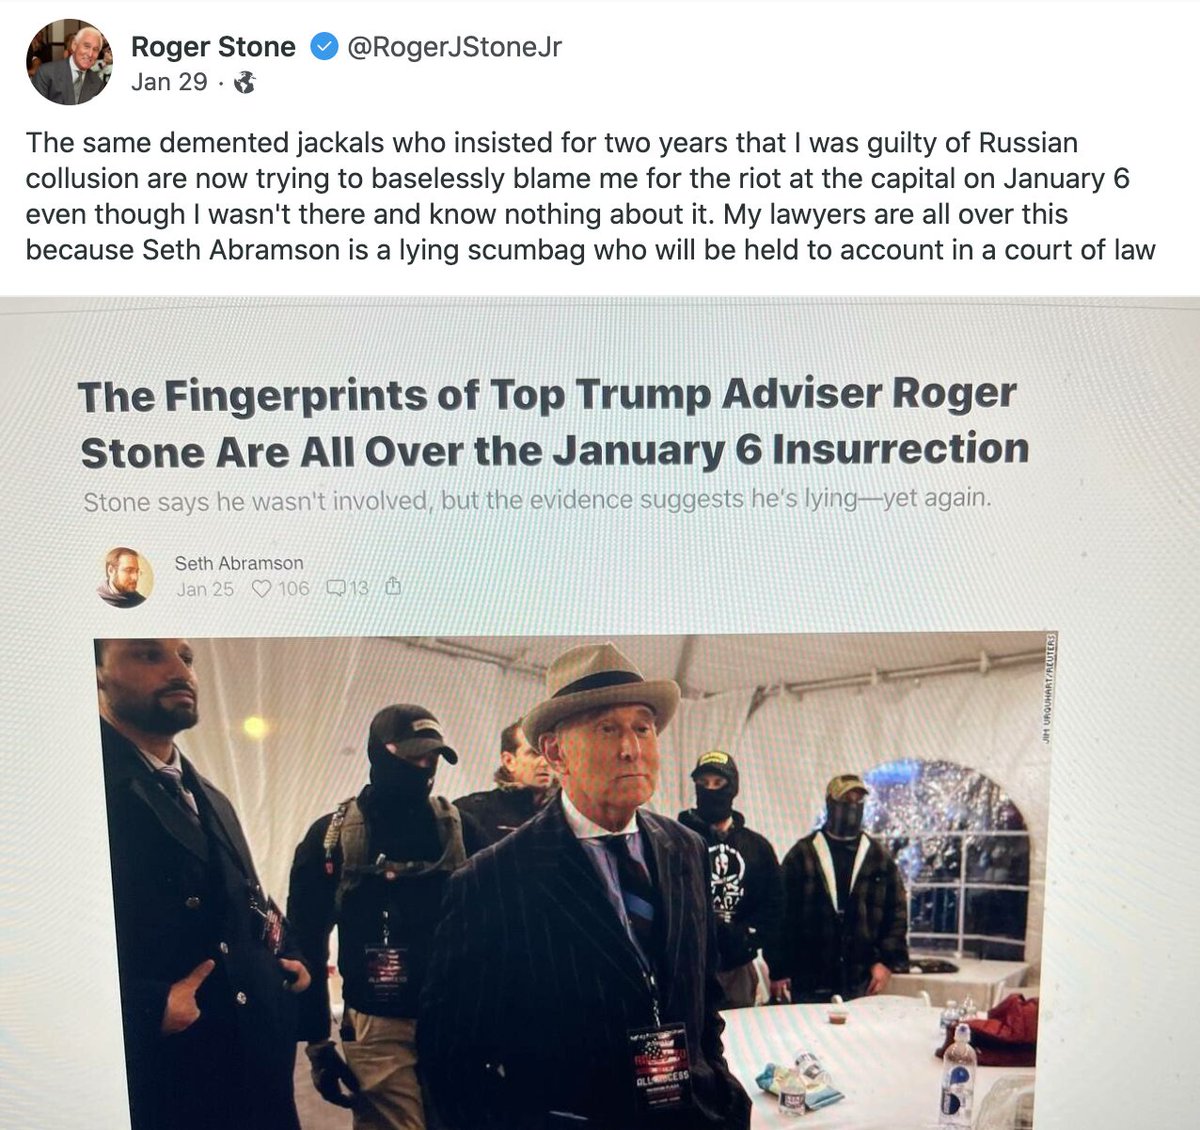 (UPDATE) Roger Stone has called me a "lying scumbag" on Gab for linking to major-media reports—including videos—detailing things he did. In one video, Stone raises money online for "protective equipment" for insurrectionists—exactly what his friend Ethan Nordean was arrested for.